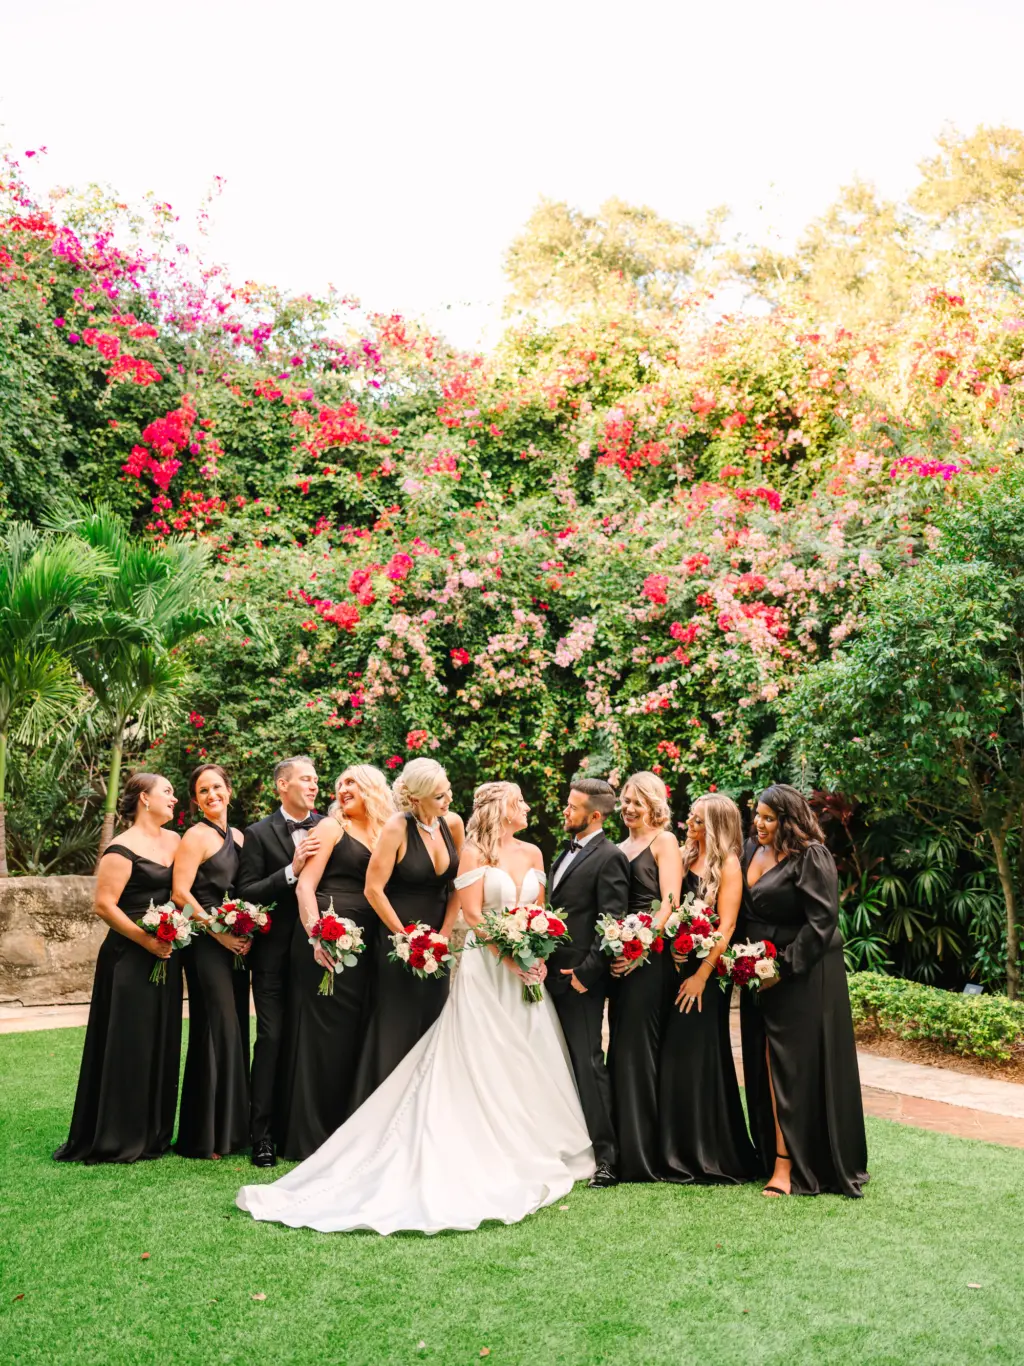 Bride with Bridal Party Wedding Portrait | Black Dresses and Tuxedo Ideas | Tampa Bay Hair and Makeup Artist Hair Makeup Femme Akoi Beauty Studio